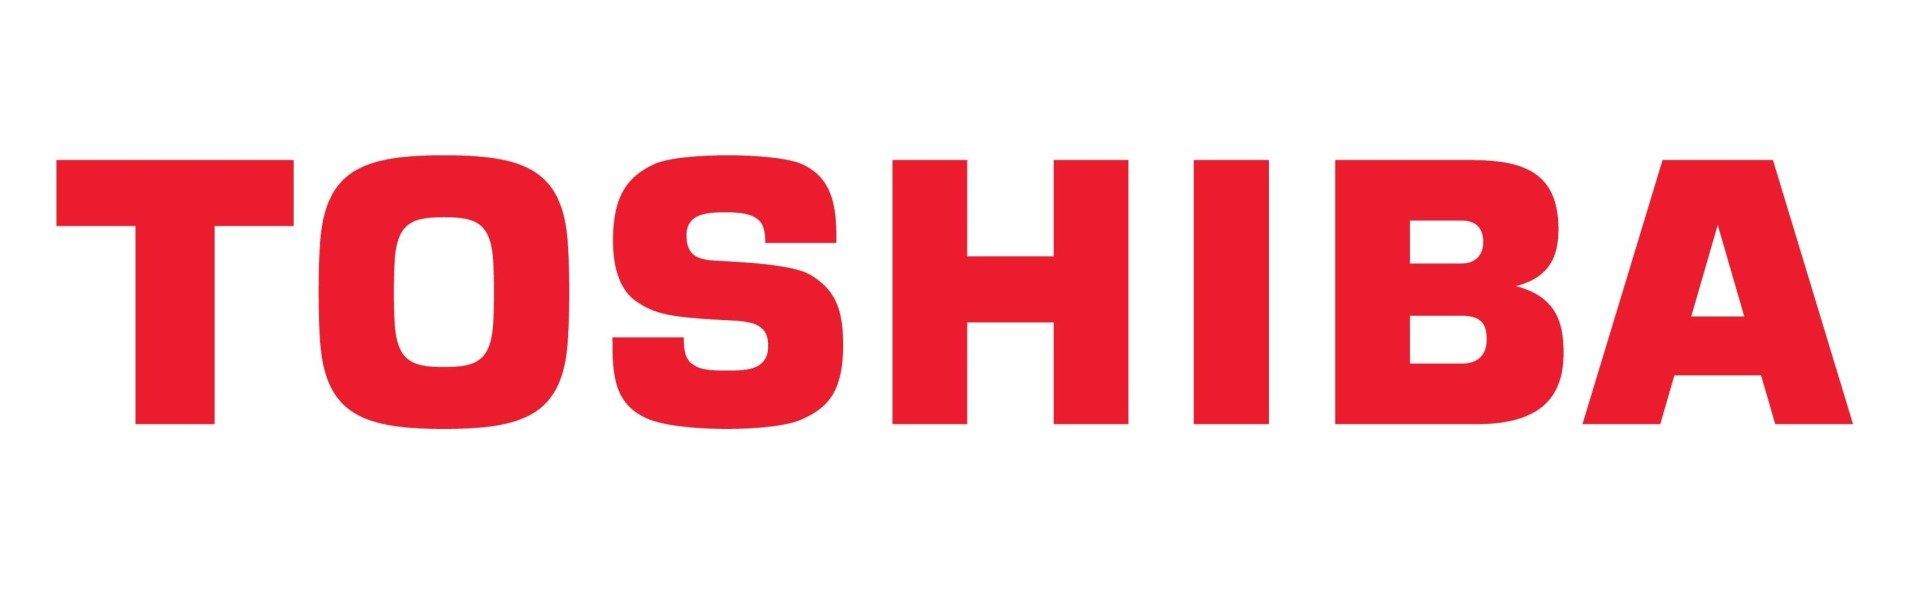 The toshiba logo is red on a white background.